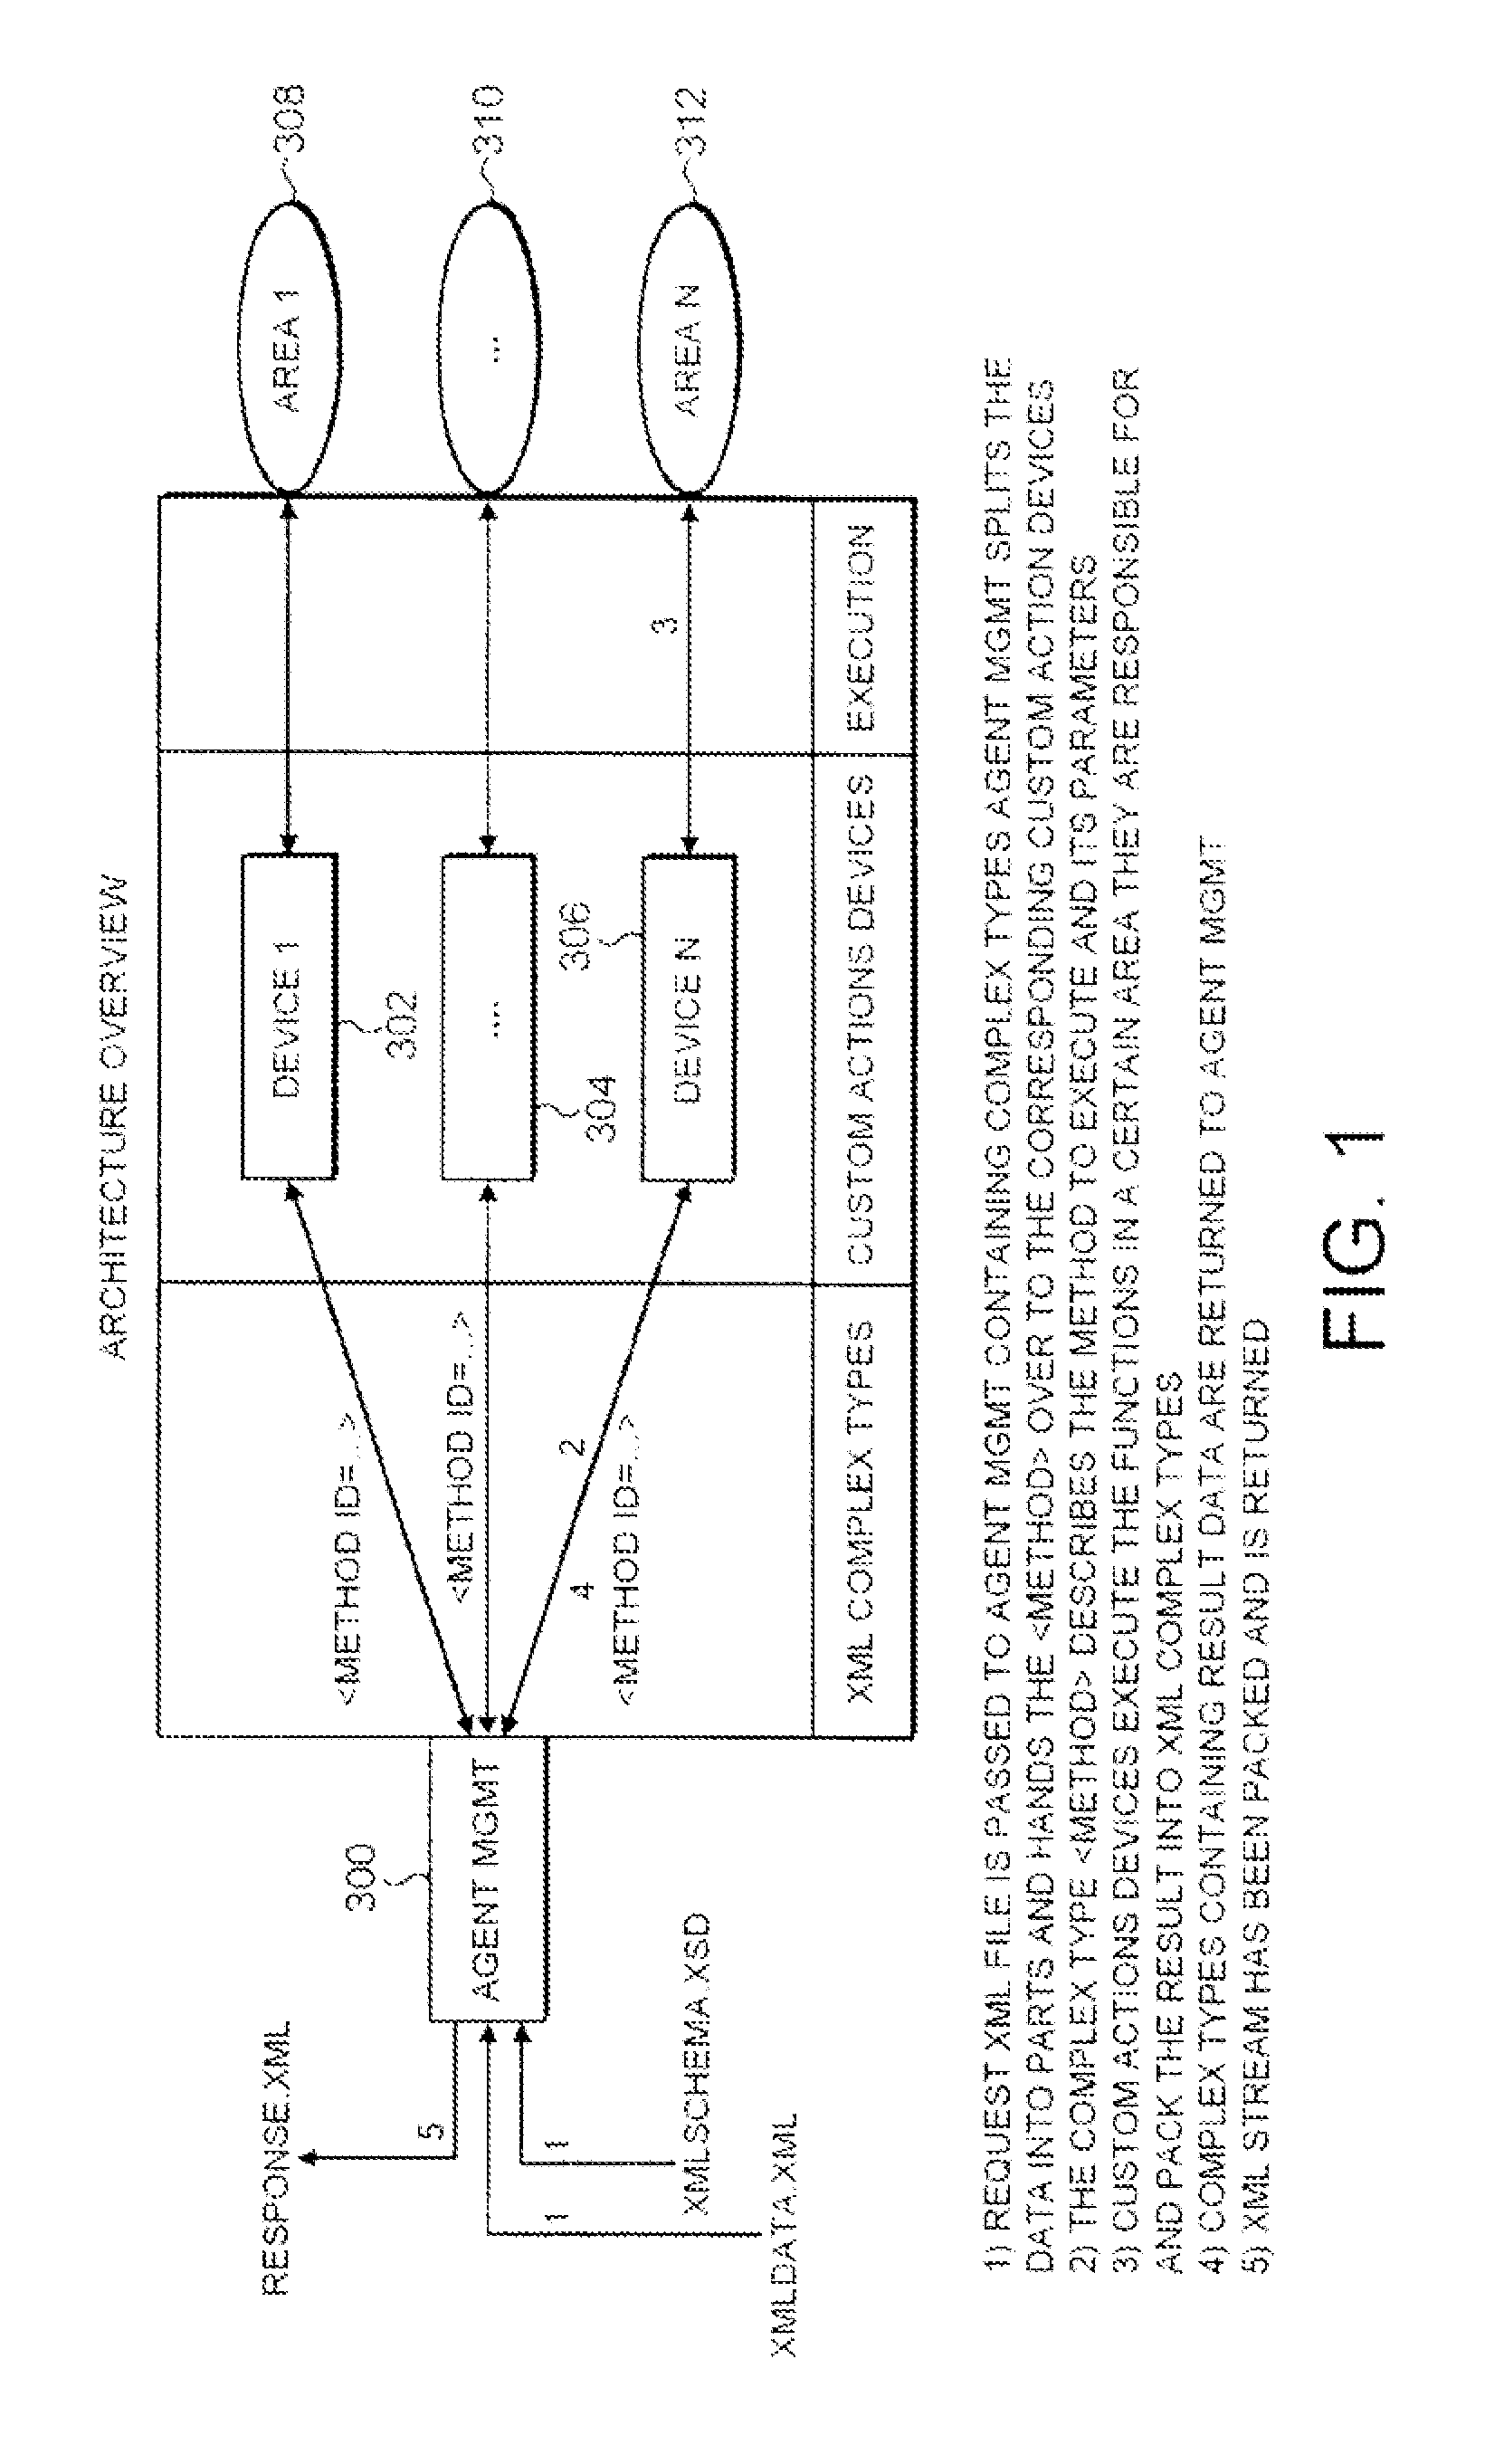 Protocol for controlling an execution process on a destination computer from a source computer